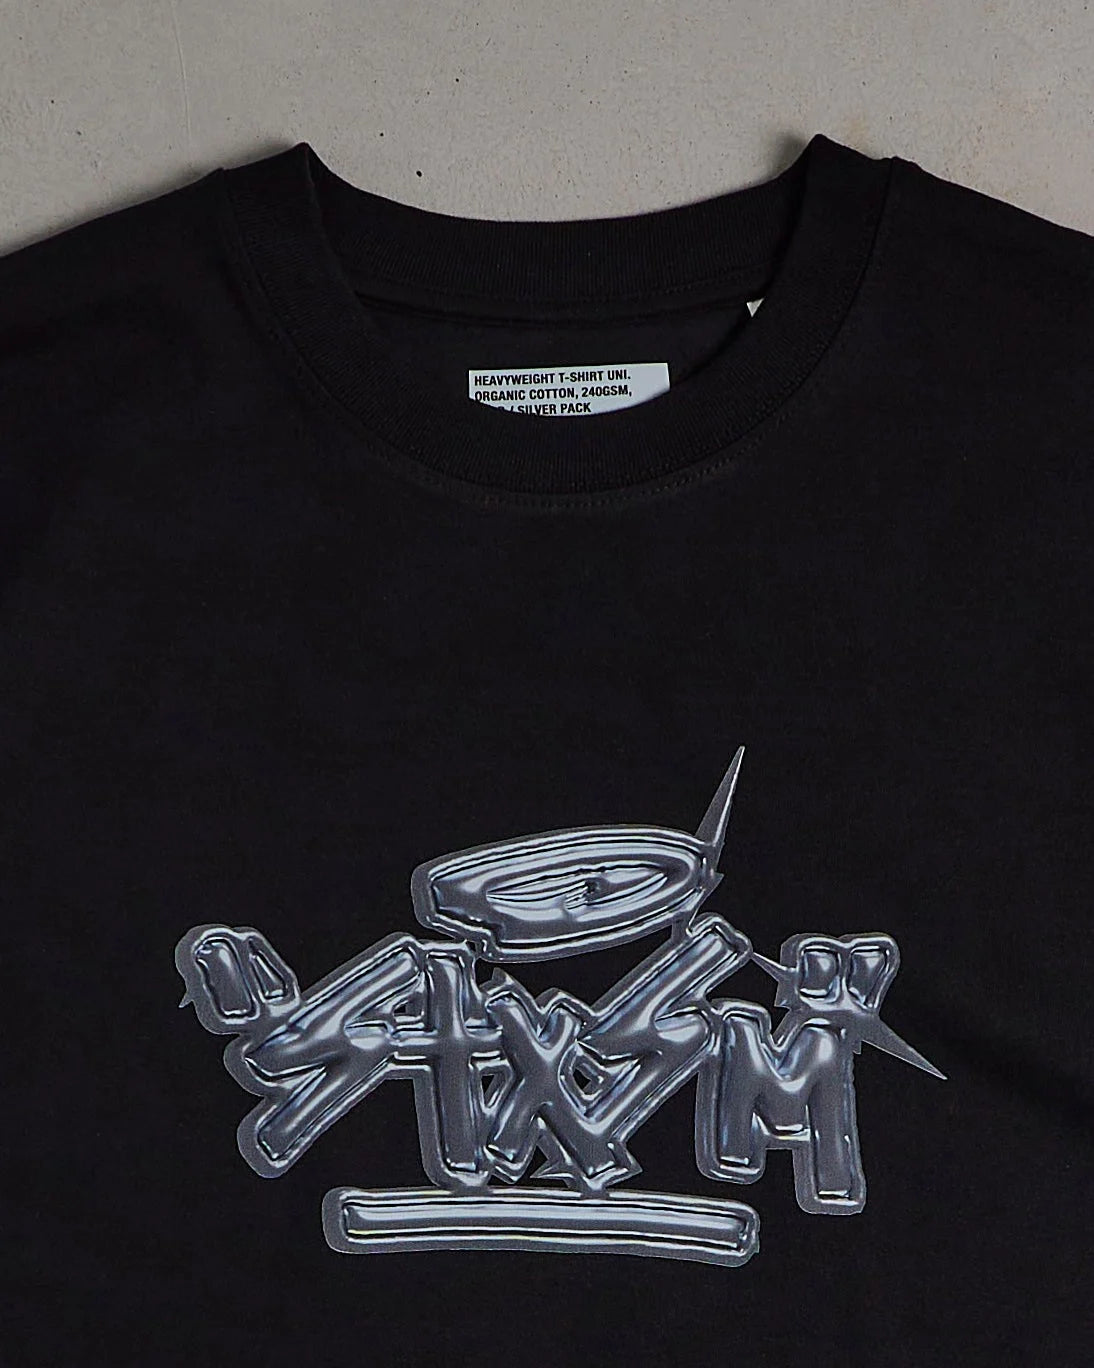 Vintage Staxism T-shirt